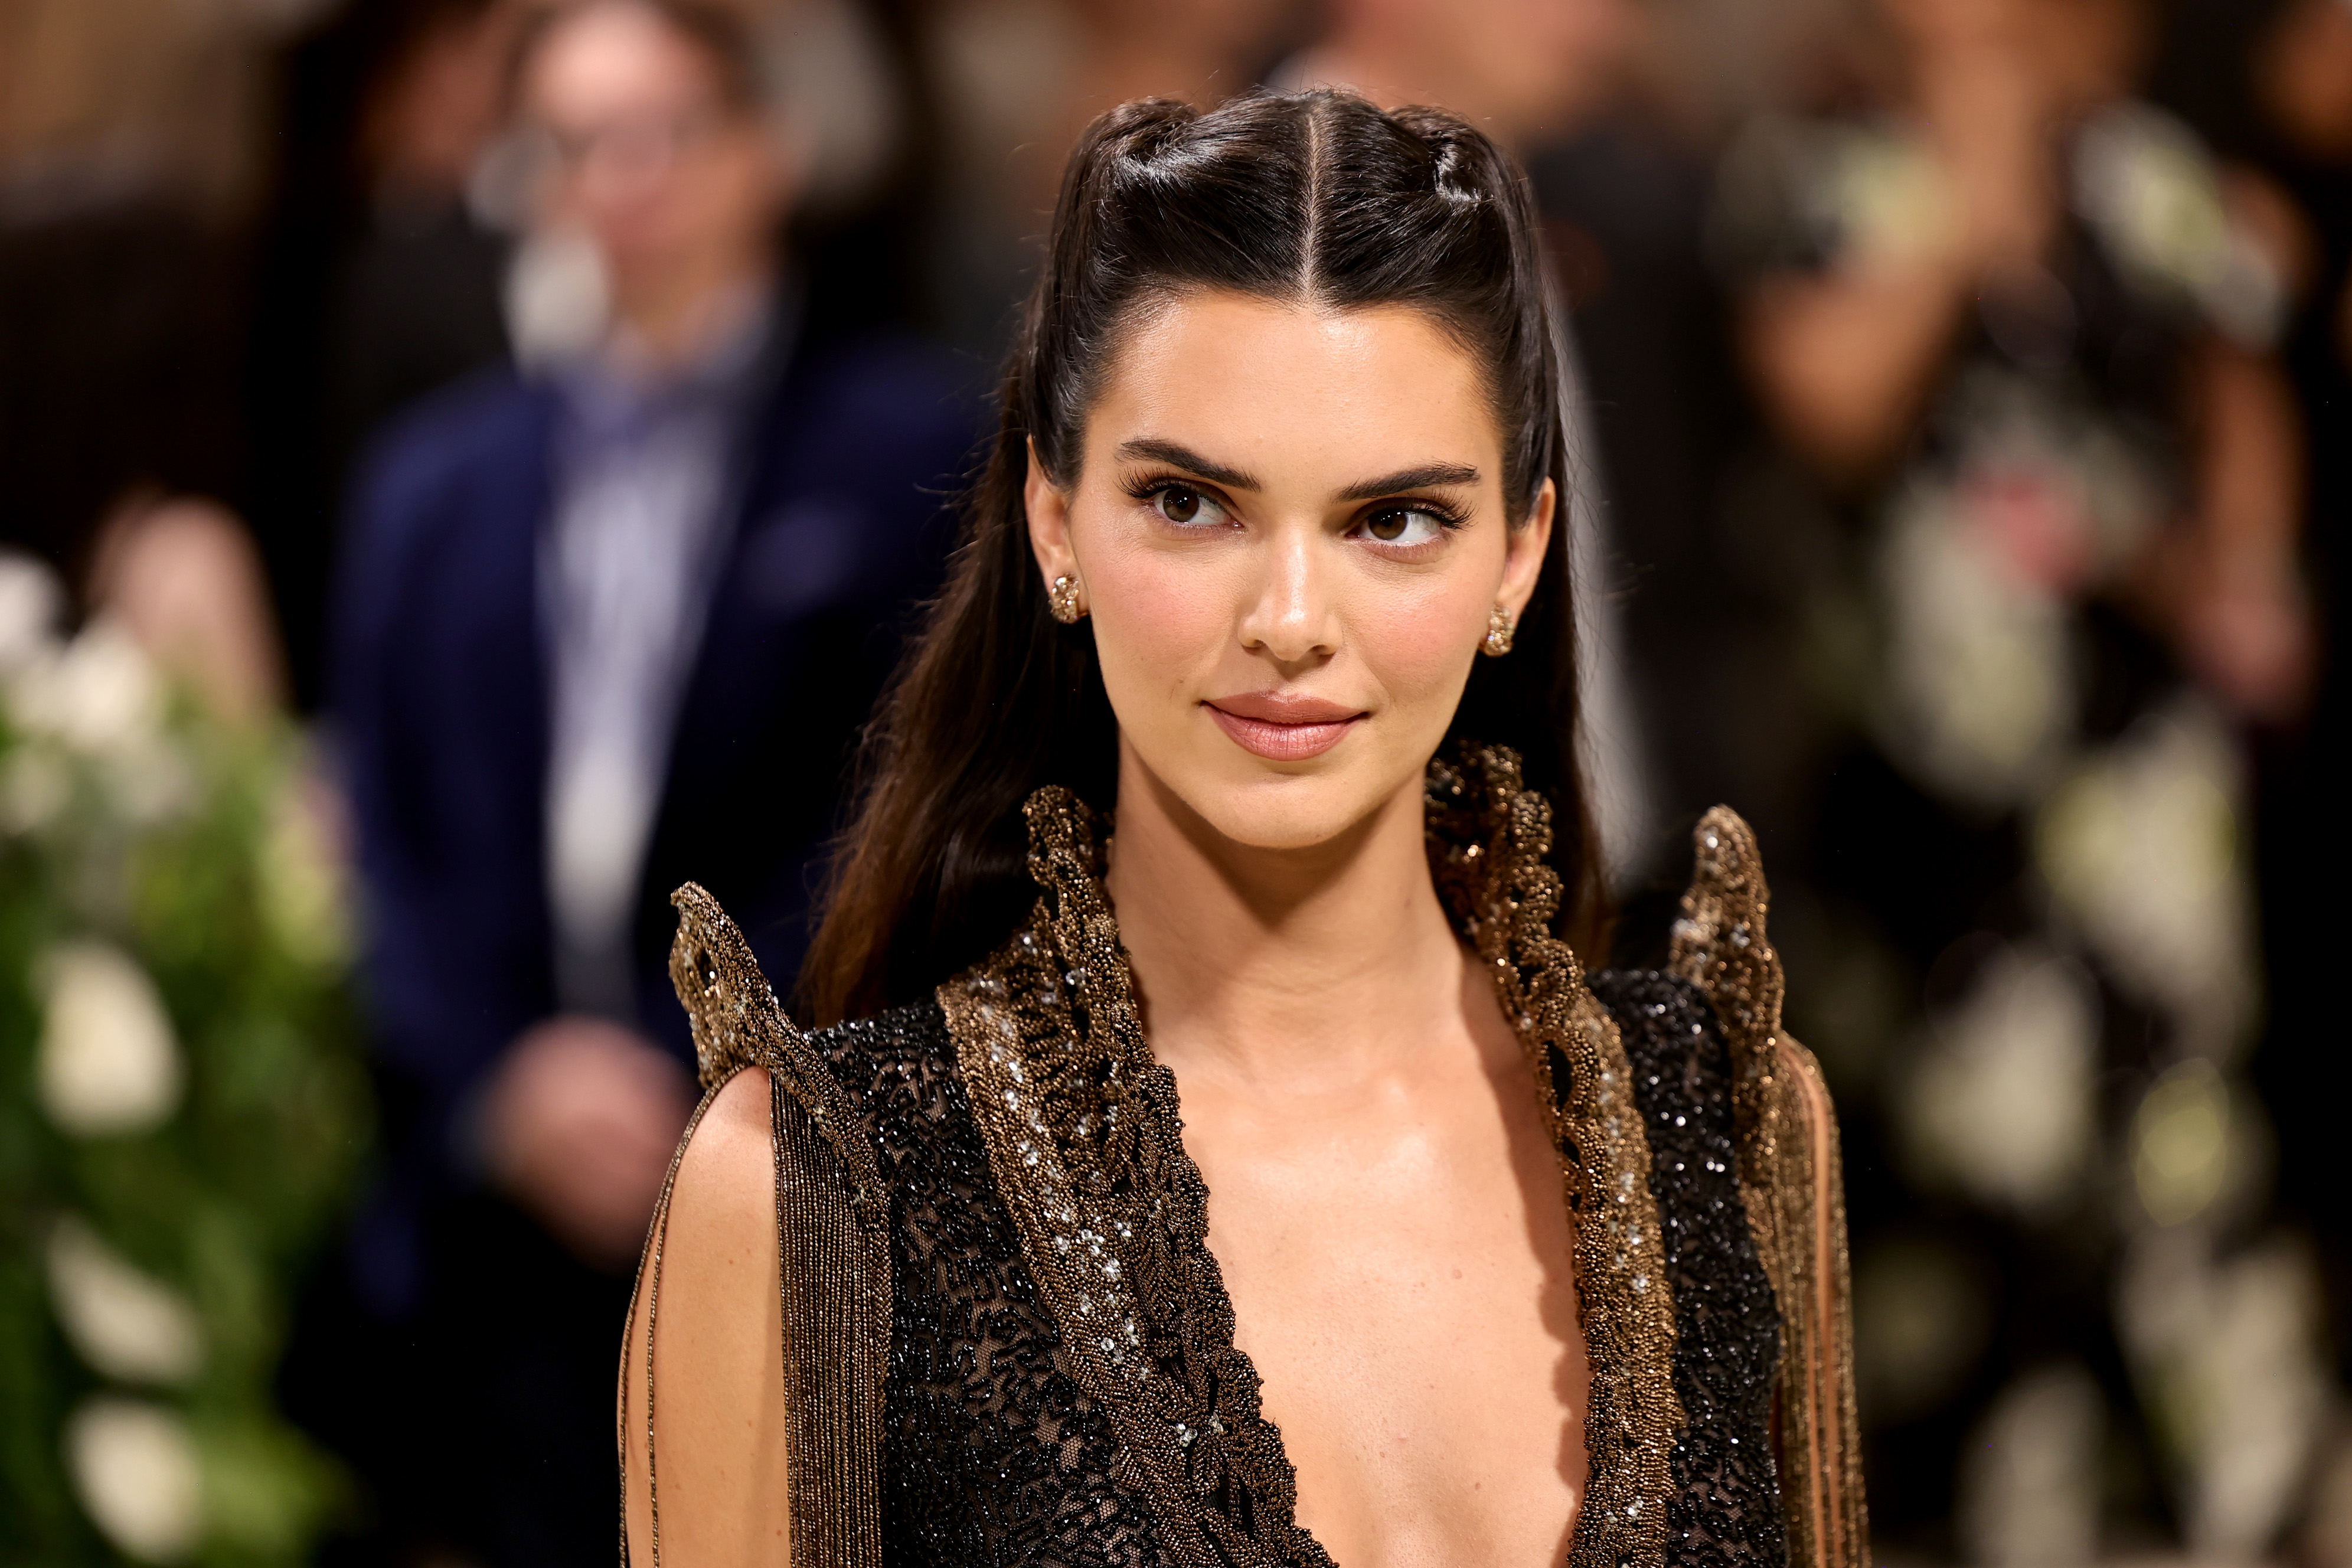 Kendall Jenner in a glittery gown with shoulder embellishments at an event